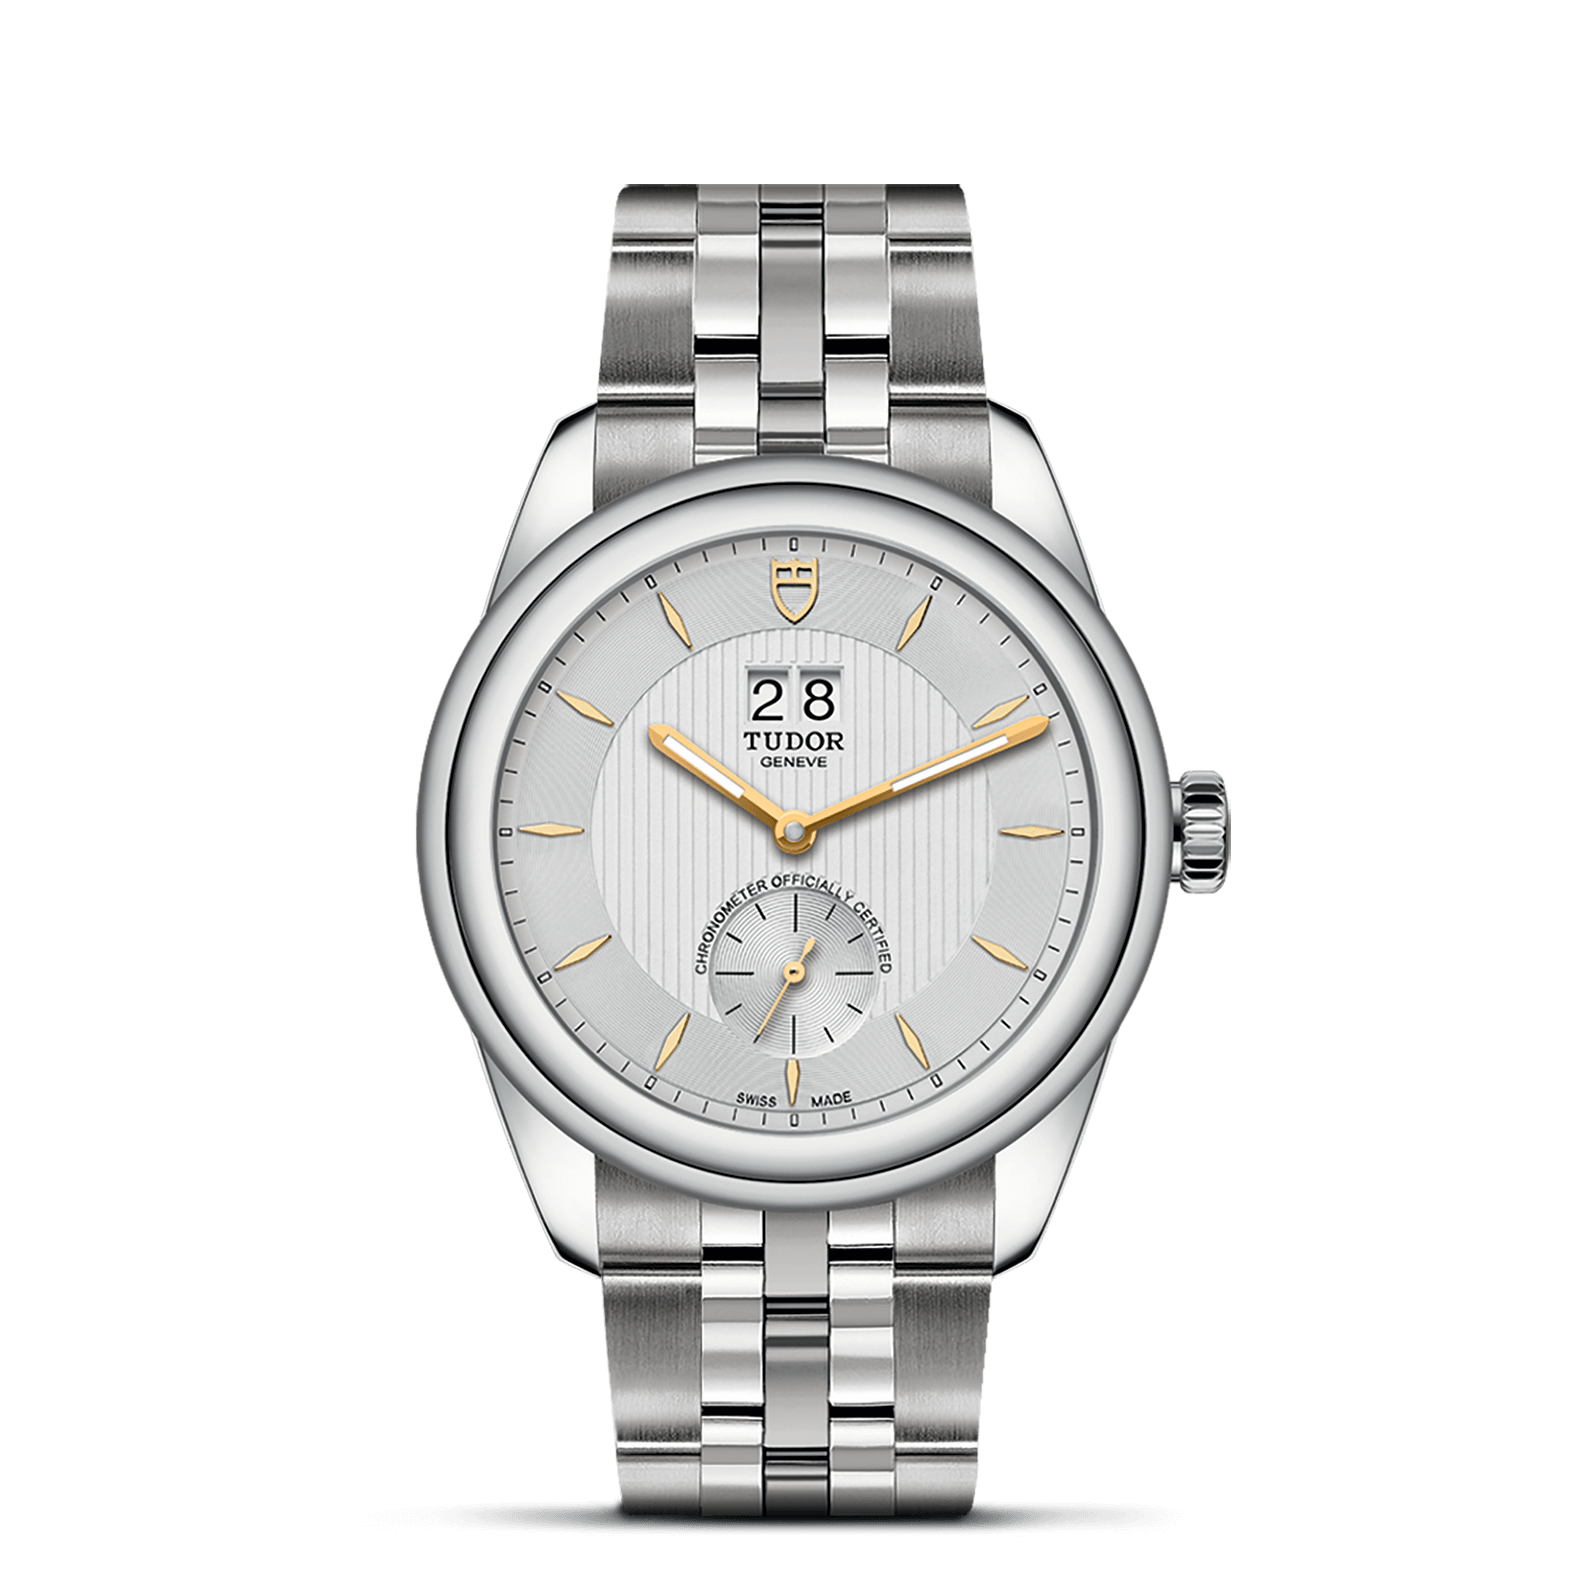 TUDOR Glamour Double Date, model #M57100-0002, at IJL Since 1937